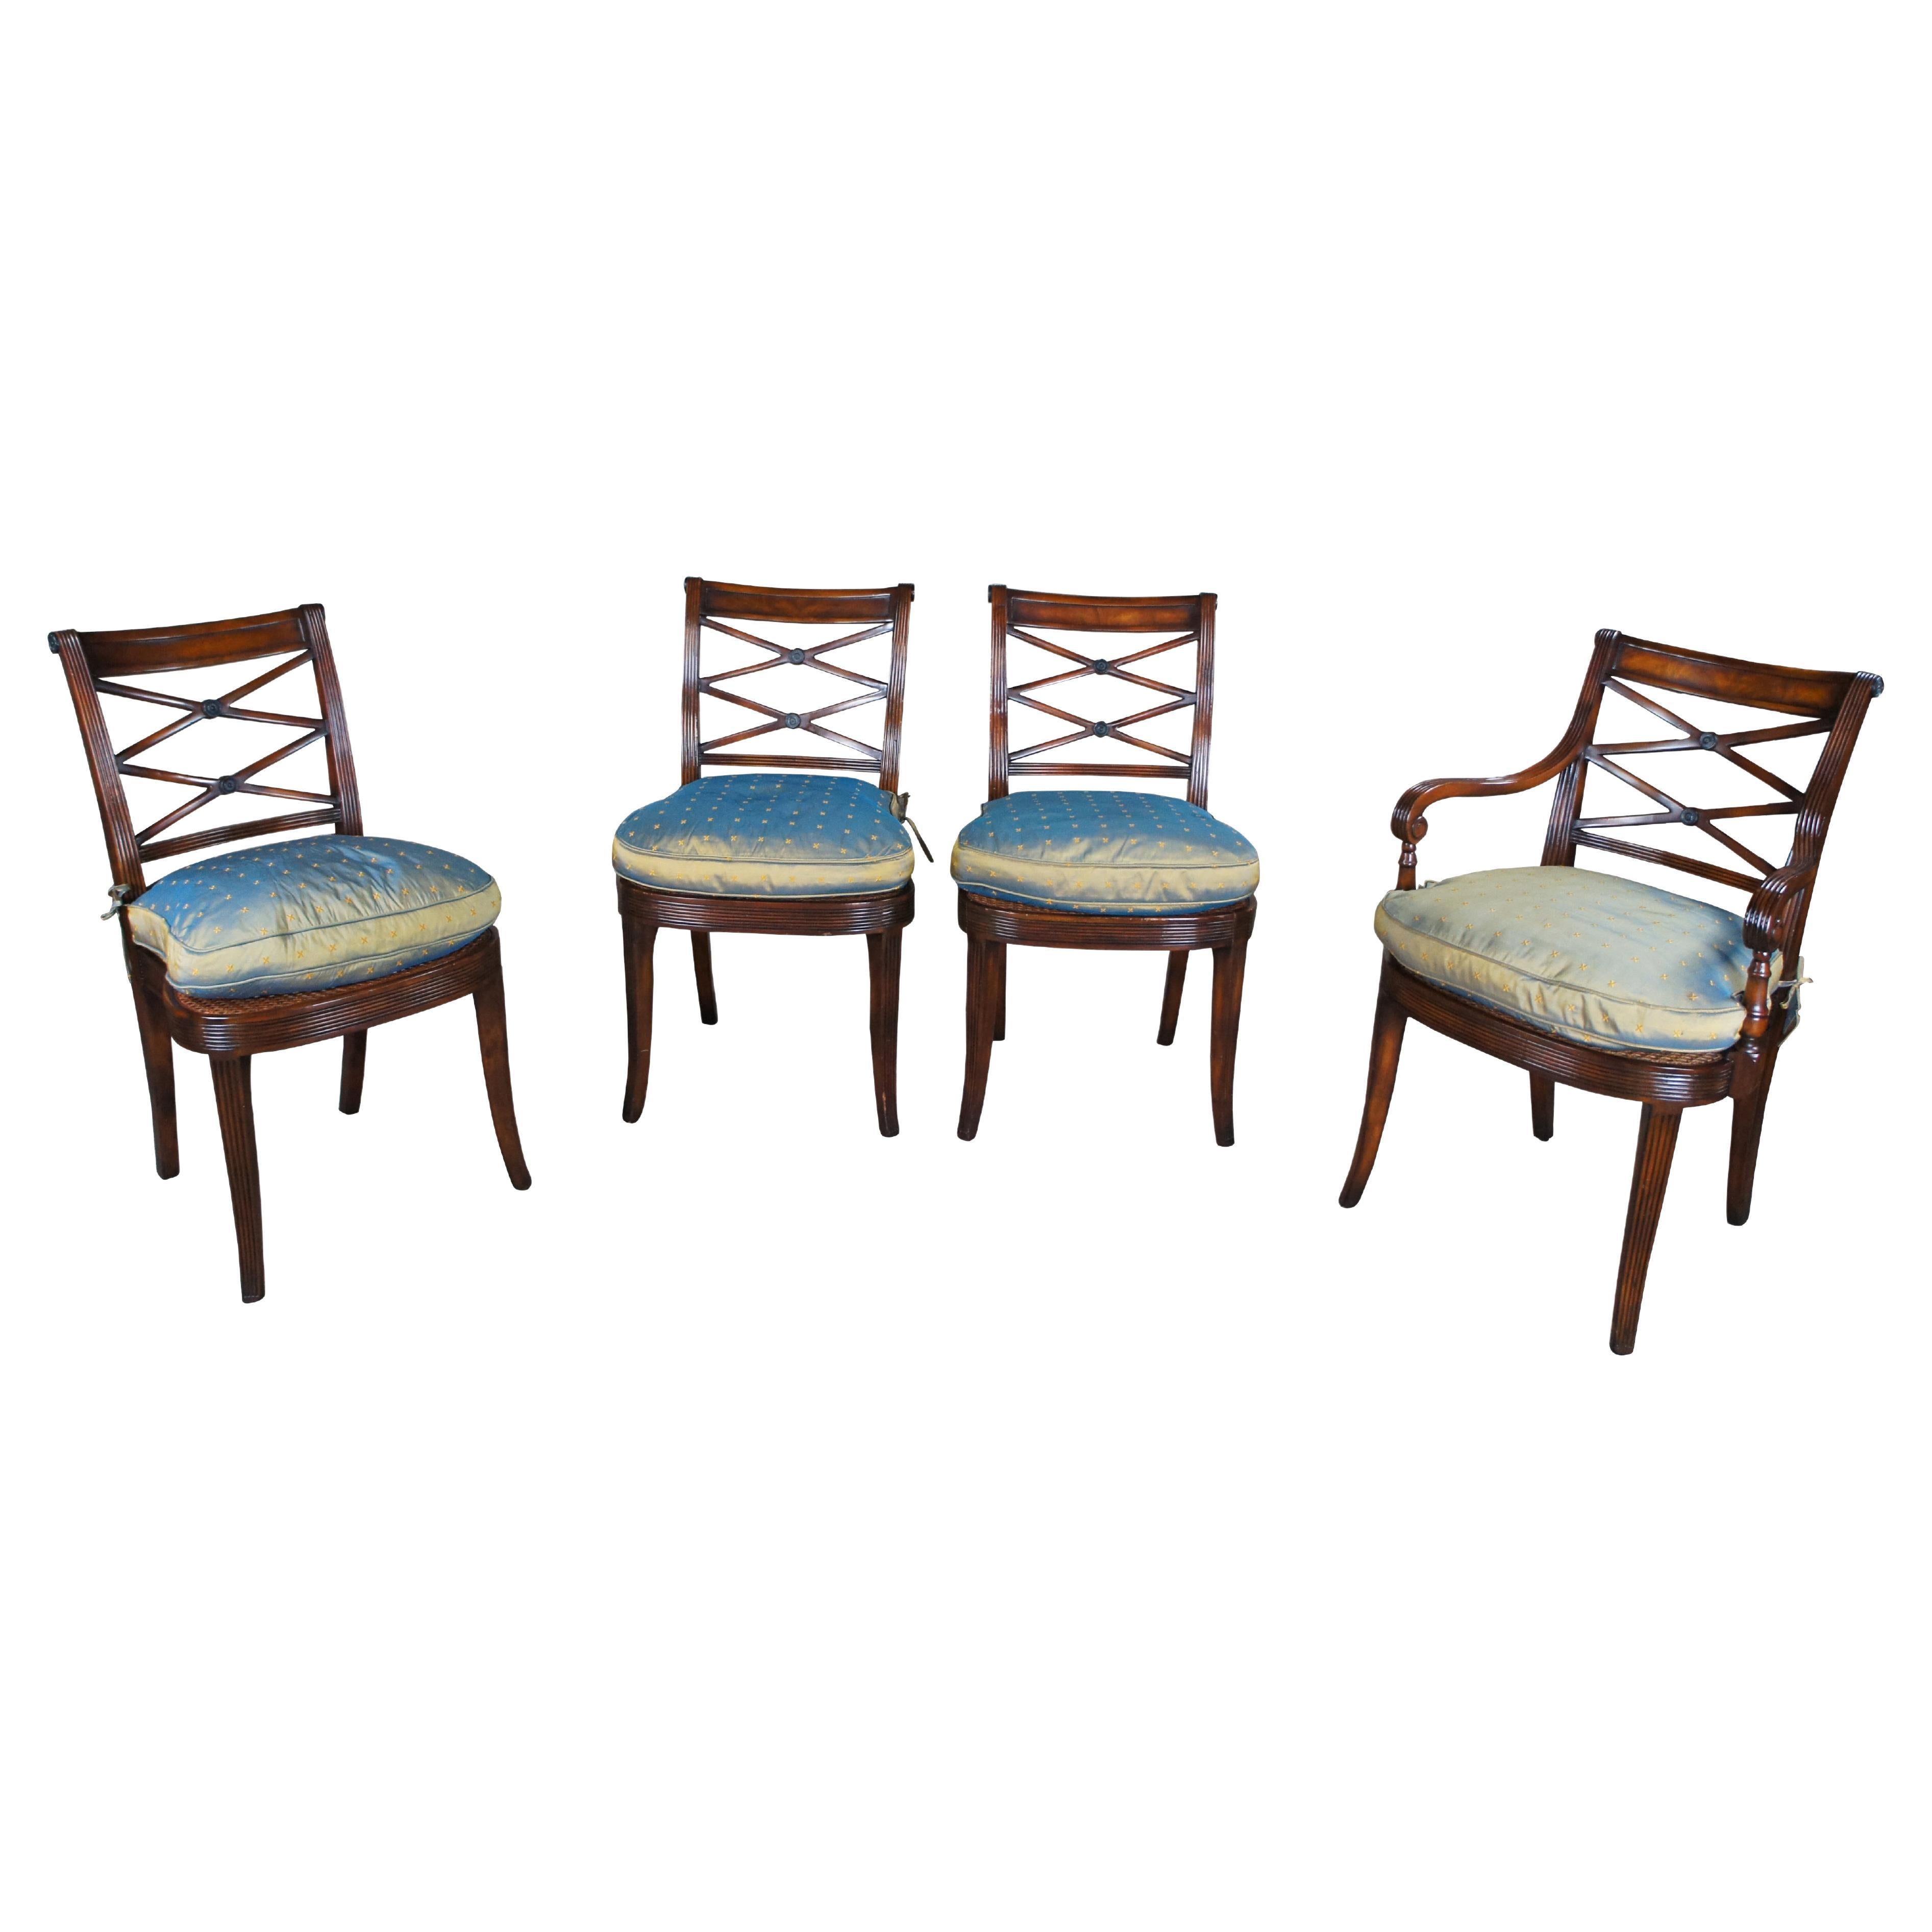 4 Theodore Alexander Flamed Mahogany X Back Caned Regency Dining Chairs 4100 For Sale